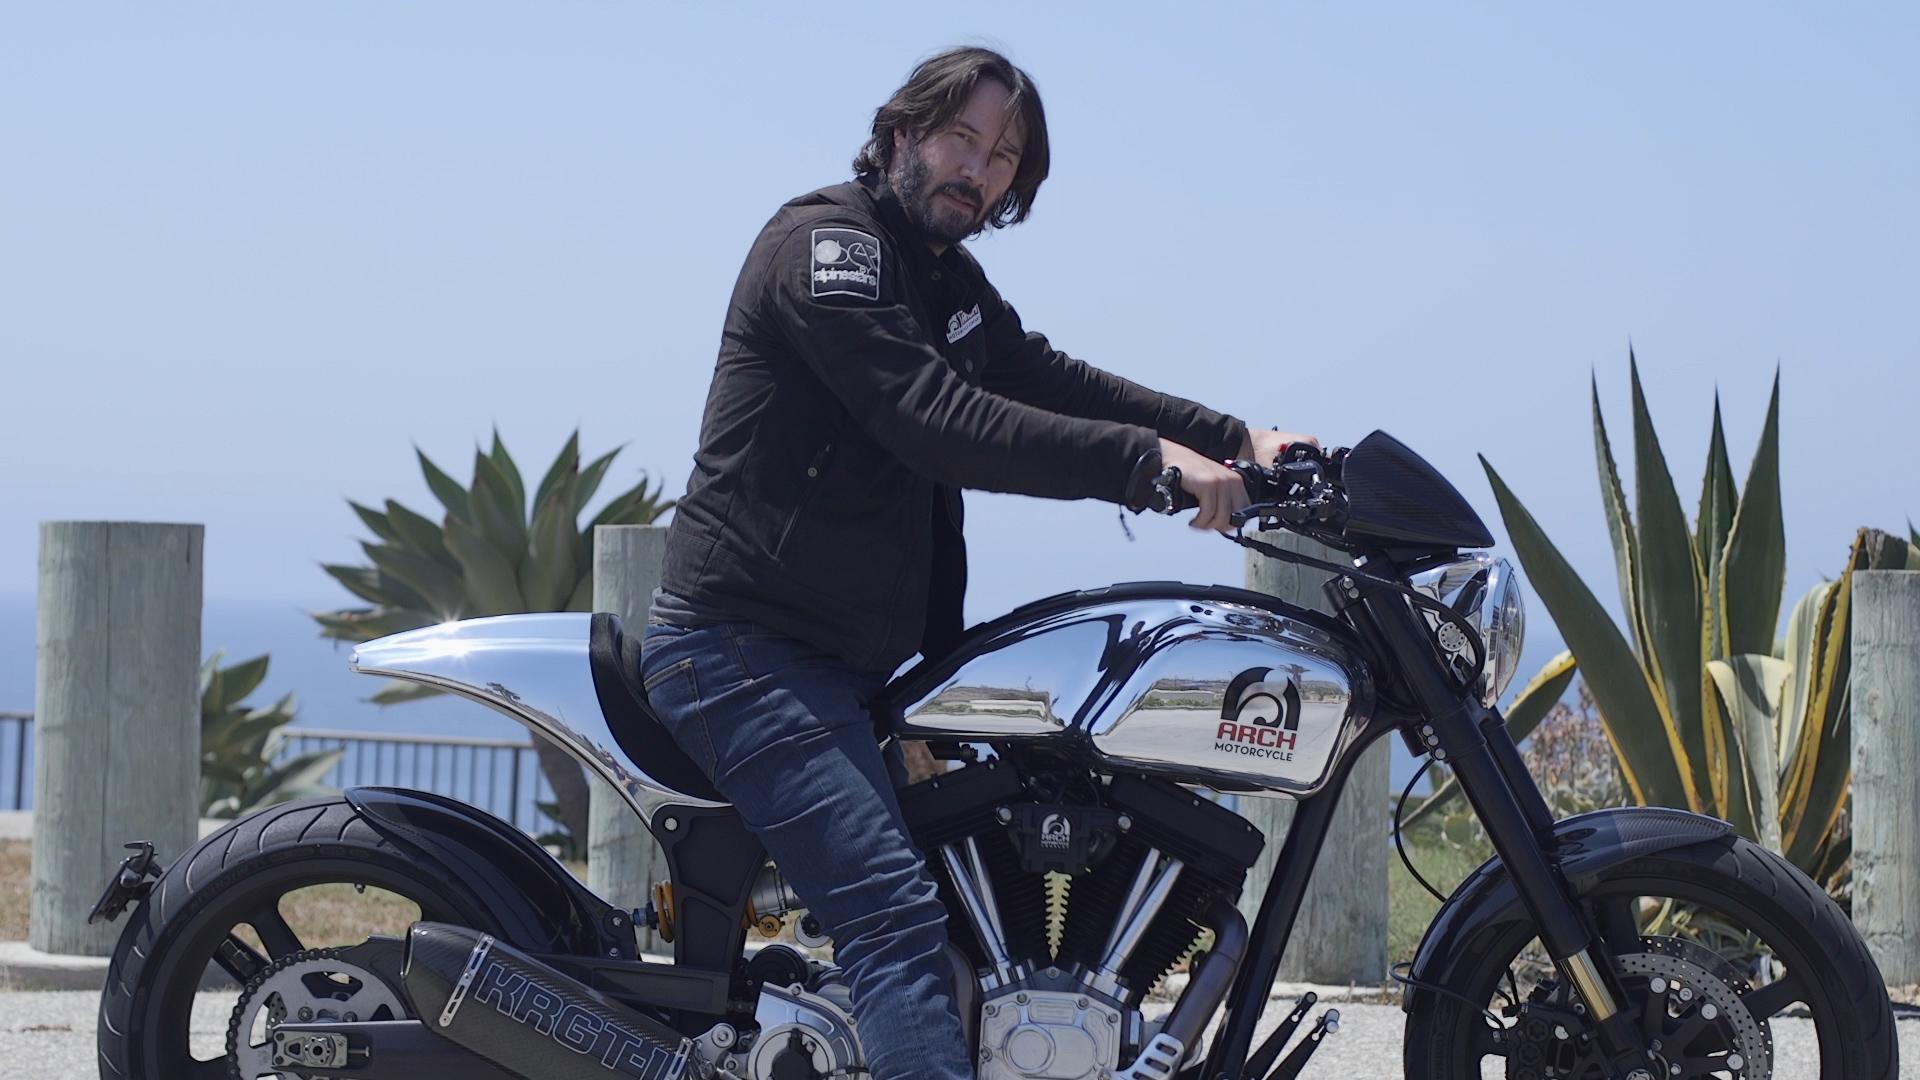 What Makes Keanu Reeves Giggle? A Really Fast Motorcycle